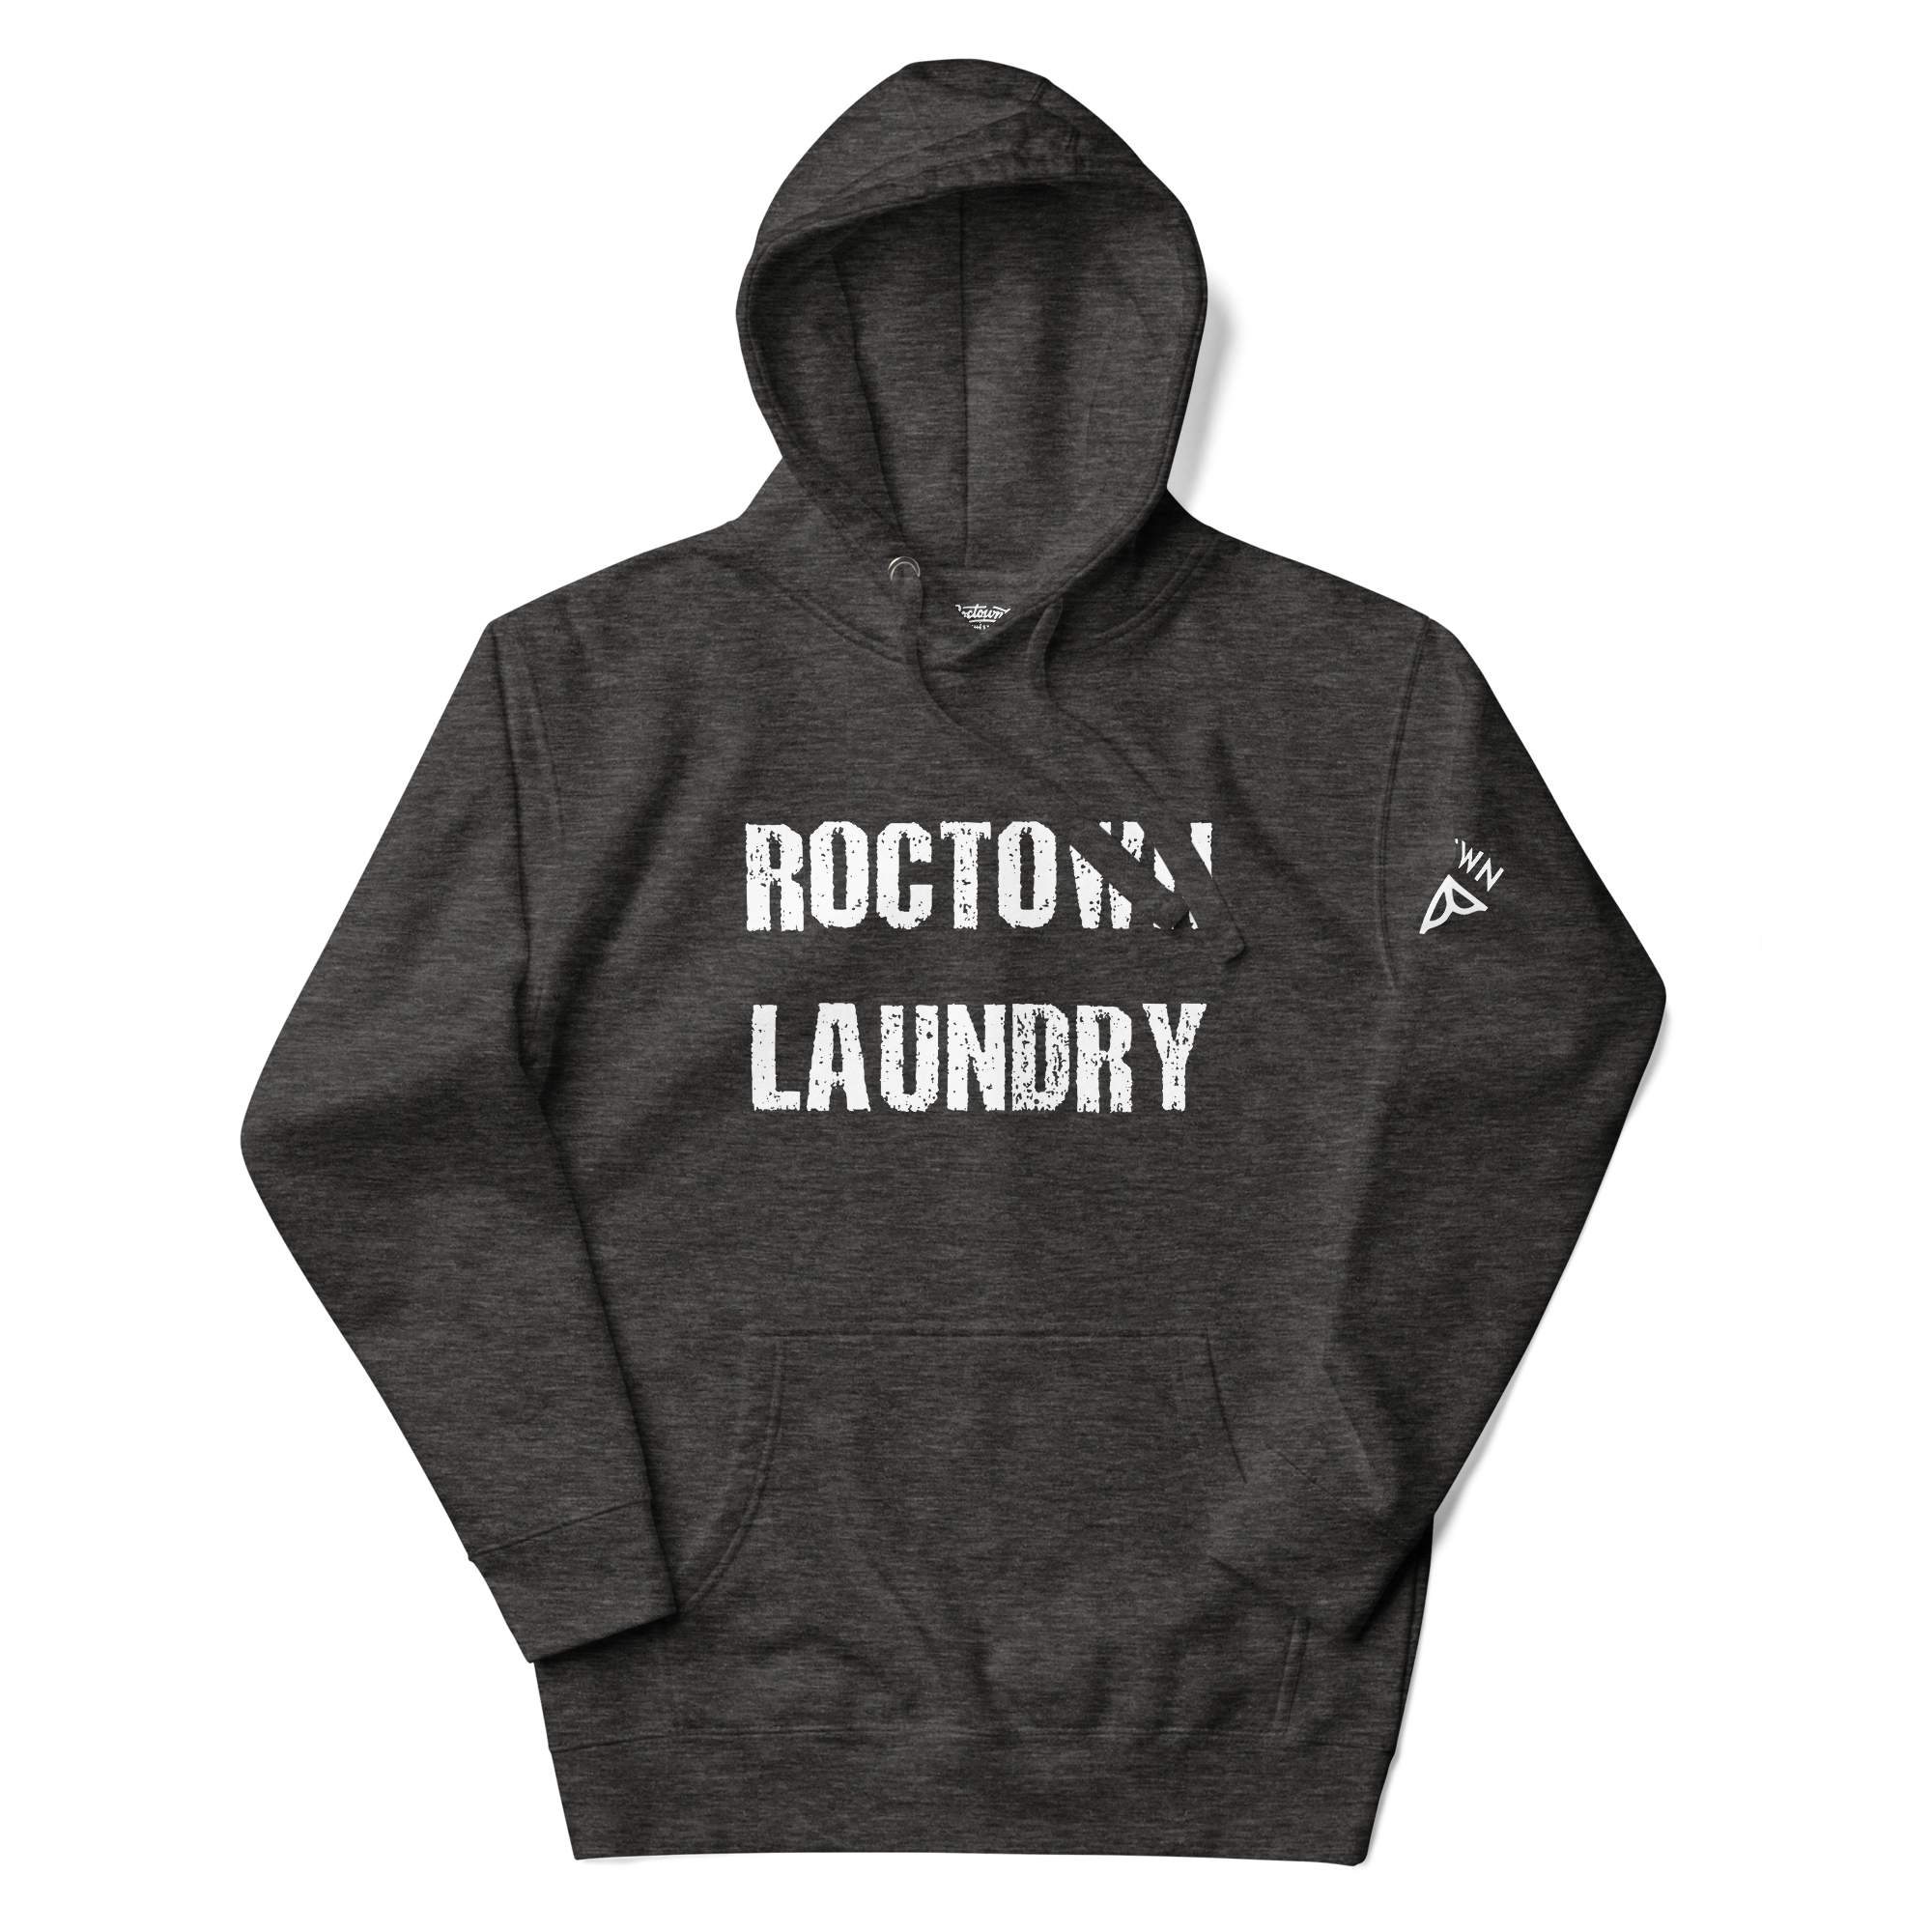 unisex-premium-hoodie-charcoal-heather-front-659d798282125.png